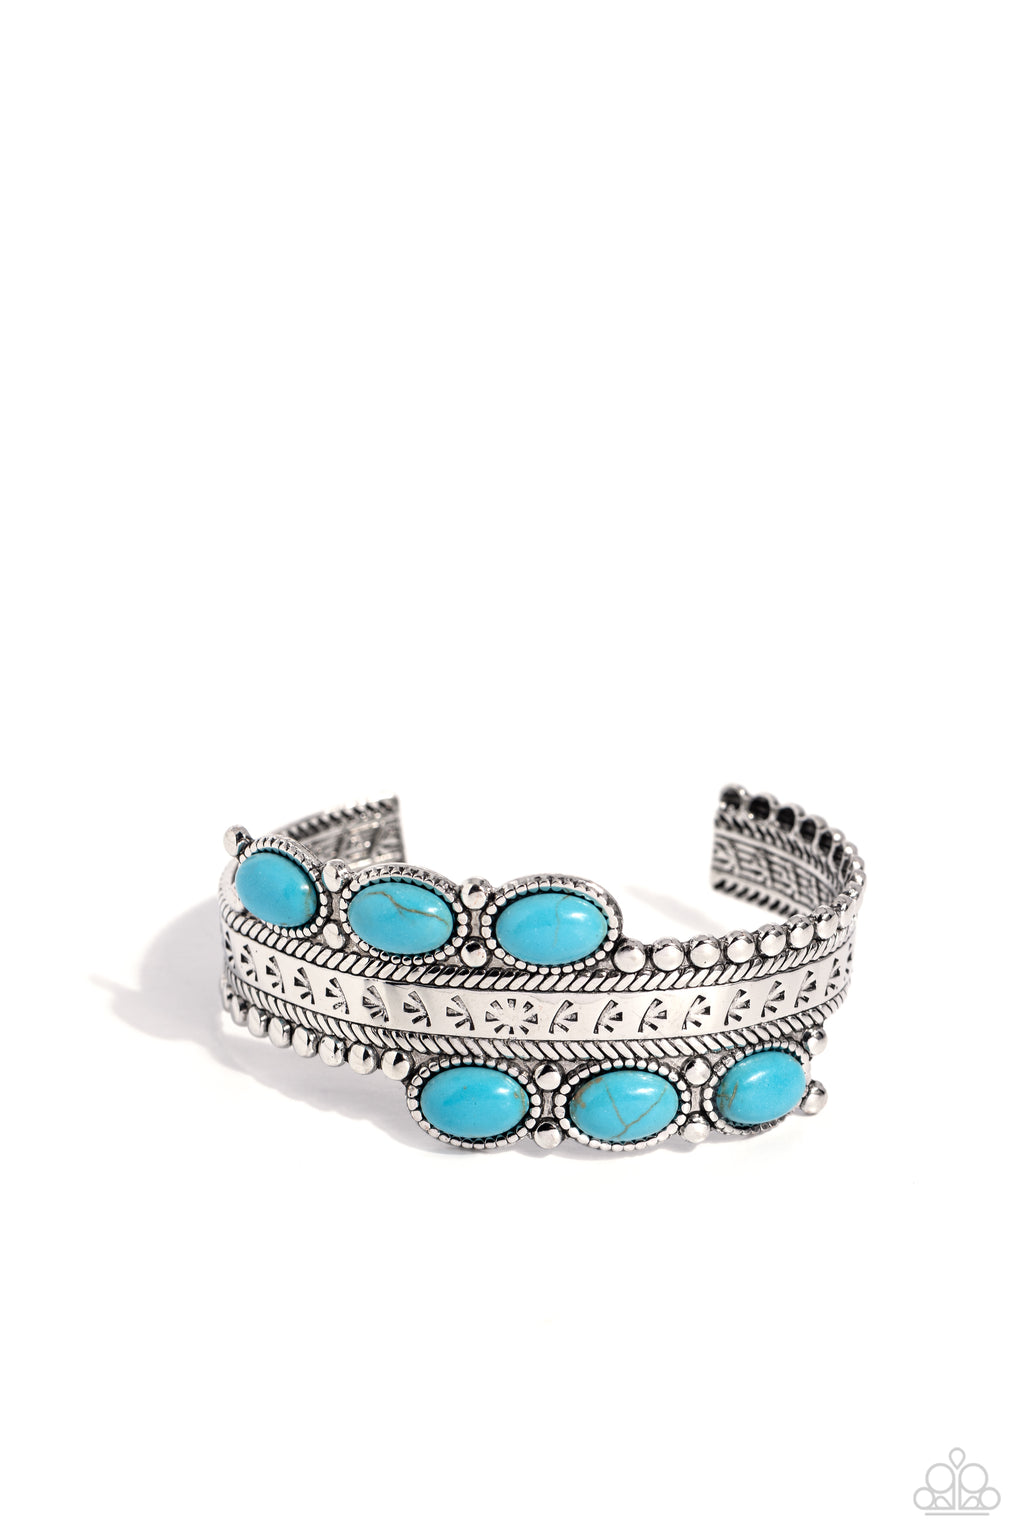 five-dollar-jewelry-a-league-of-their-stone-blue-bracelet-paparazzi-accessories